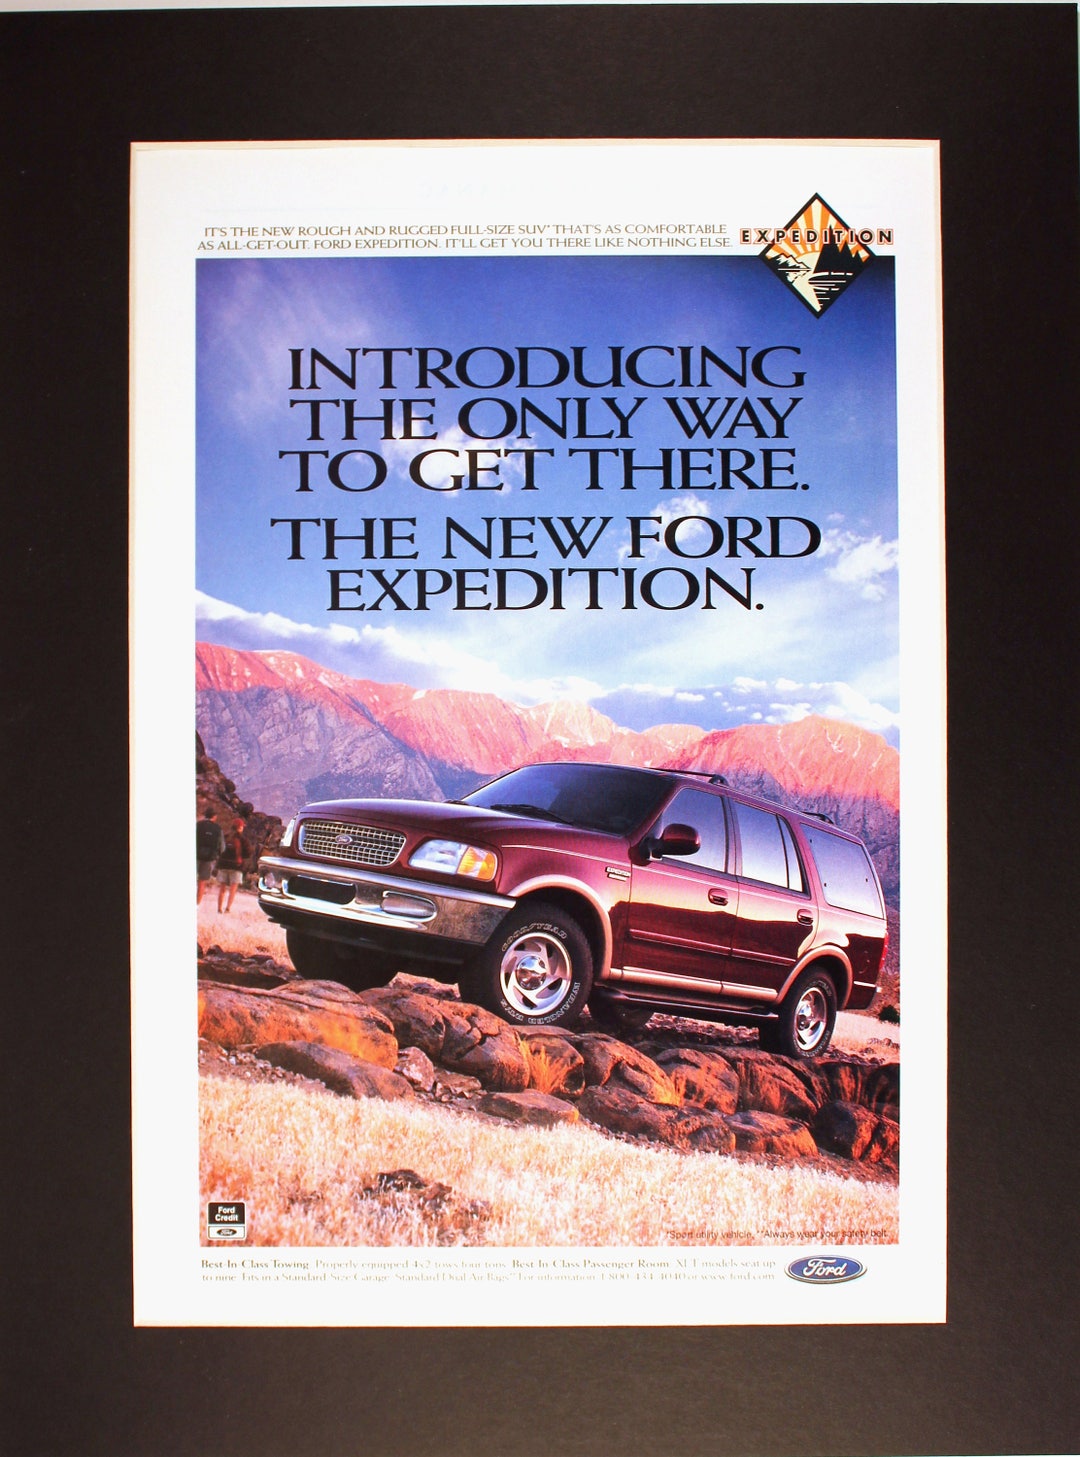 1997 Ford Expedition Magazine Ad /vintage Ad/ Cool Men's Gift